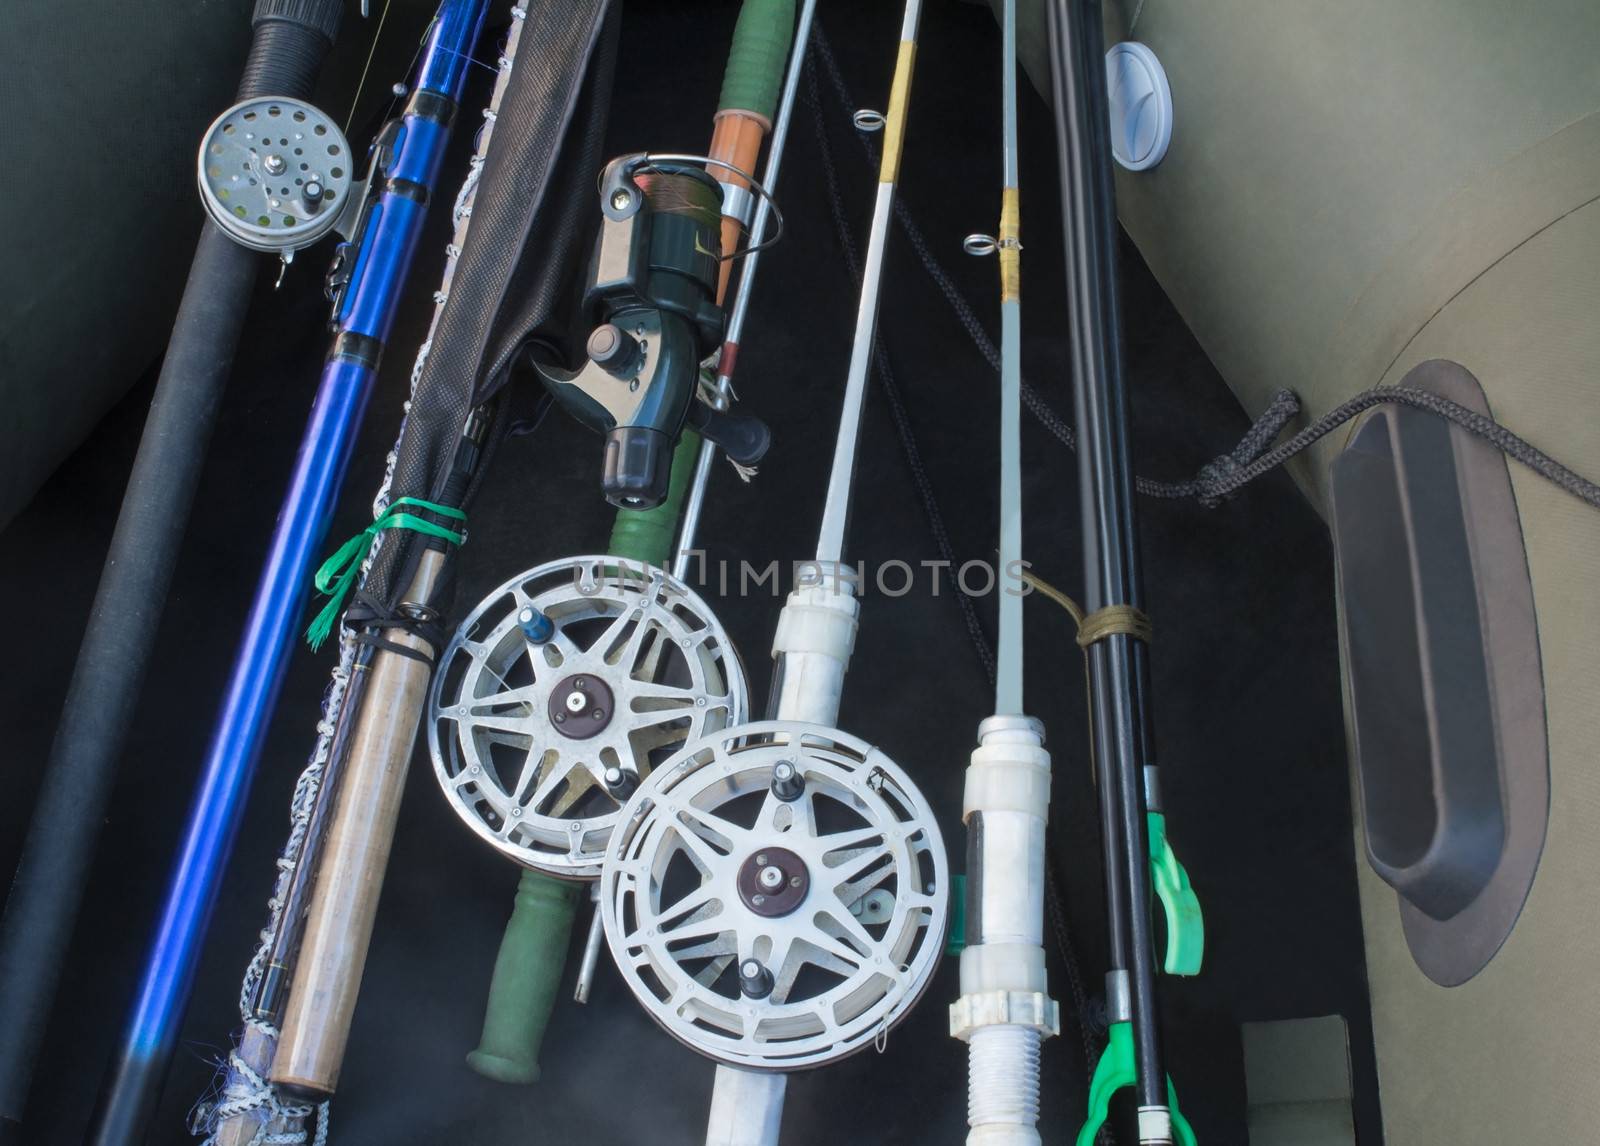 Prepared for fishing, spinning, fishing rods, rubber boat. by georgina198